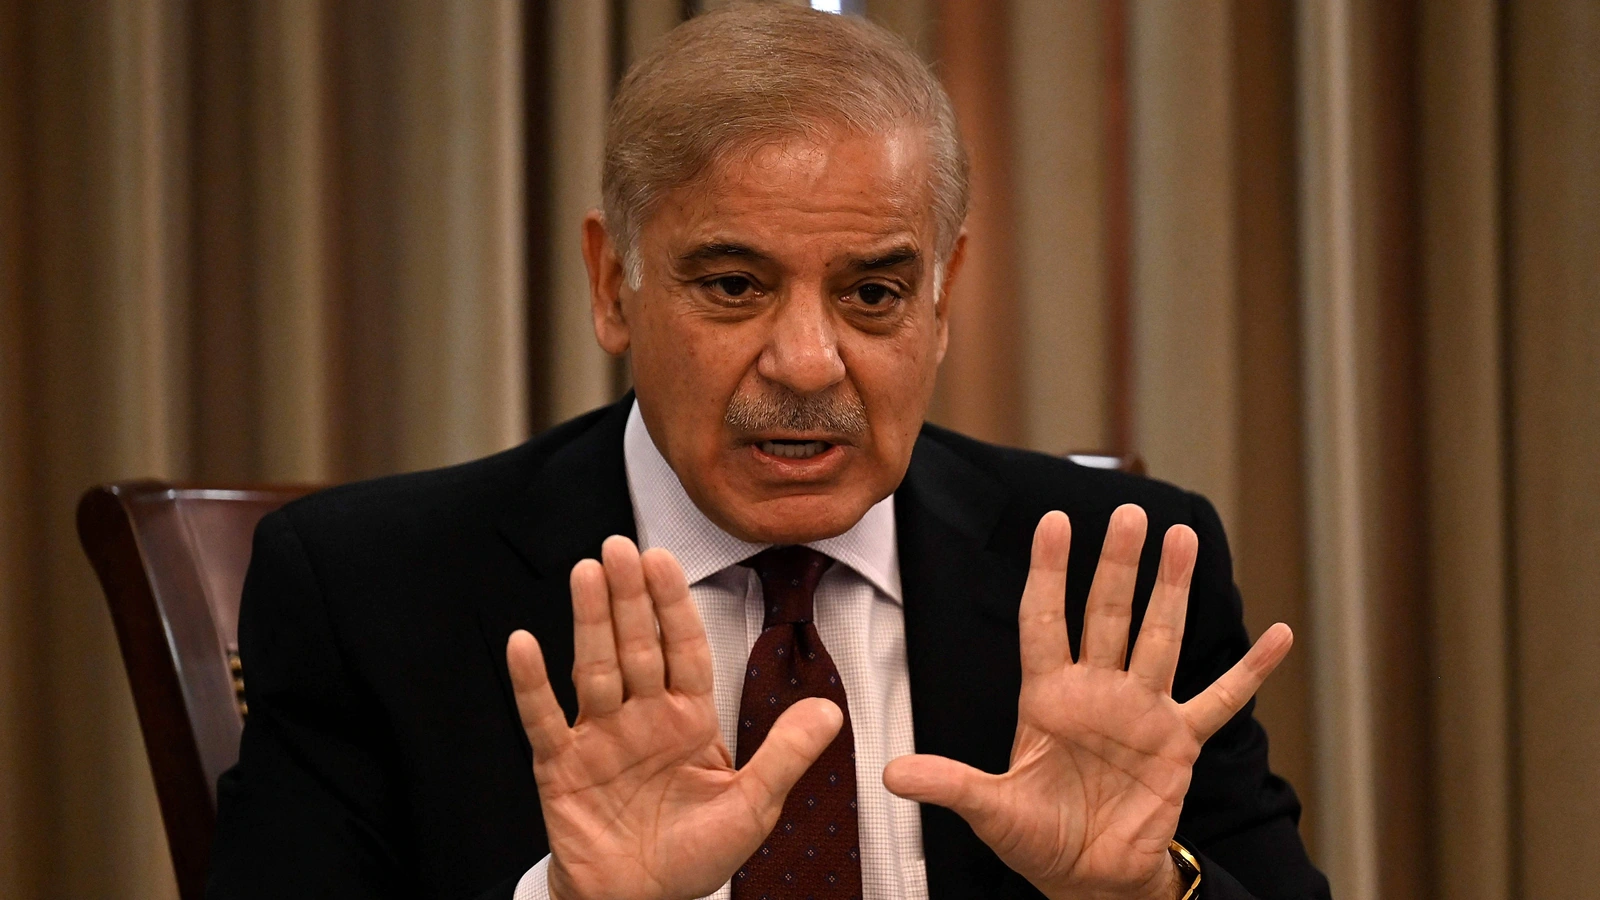 shahbaz-sharif-said-today-will-be-a-new-morning